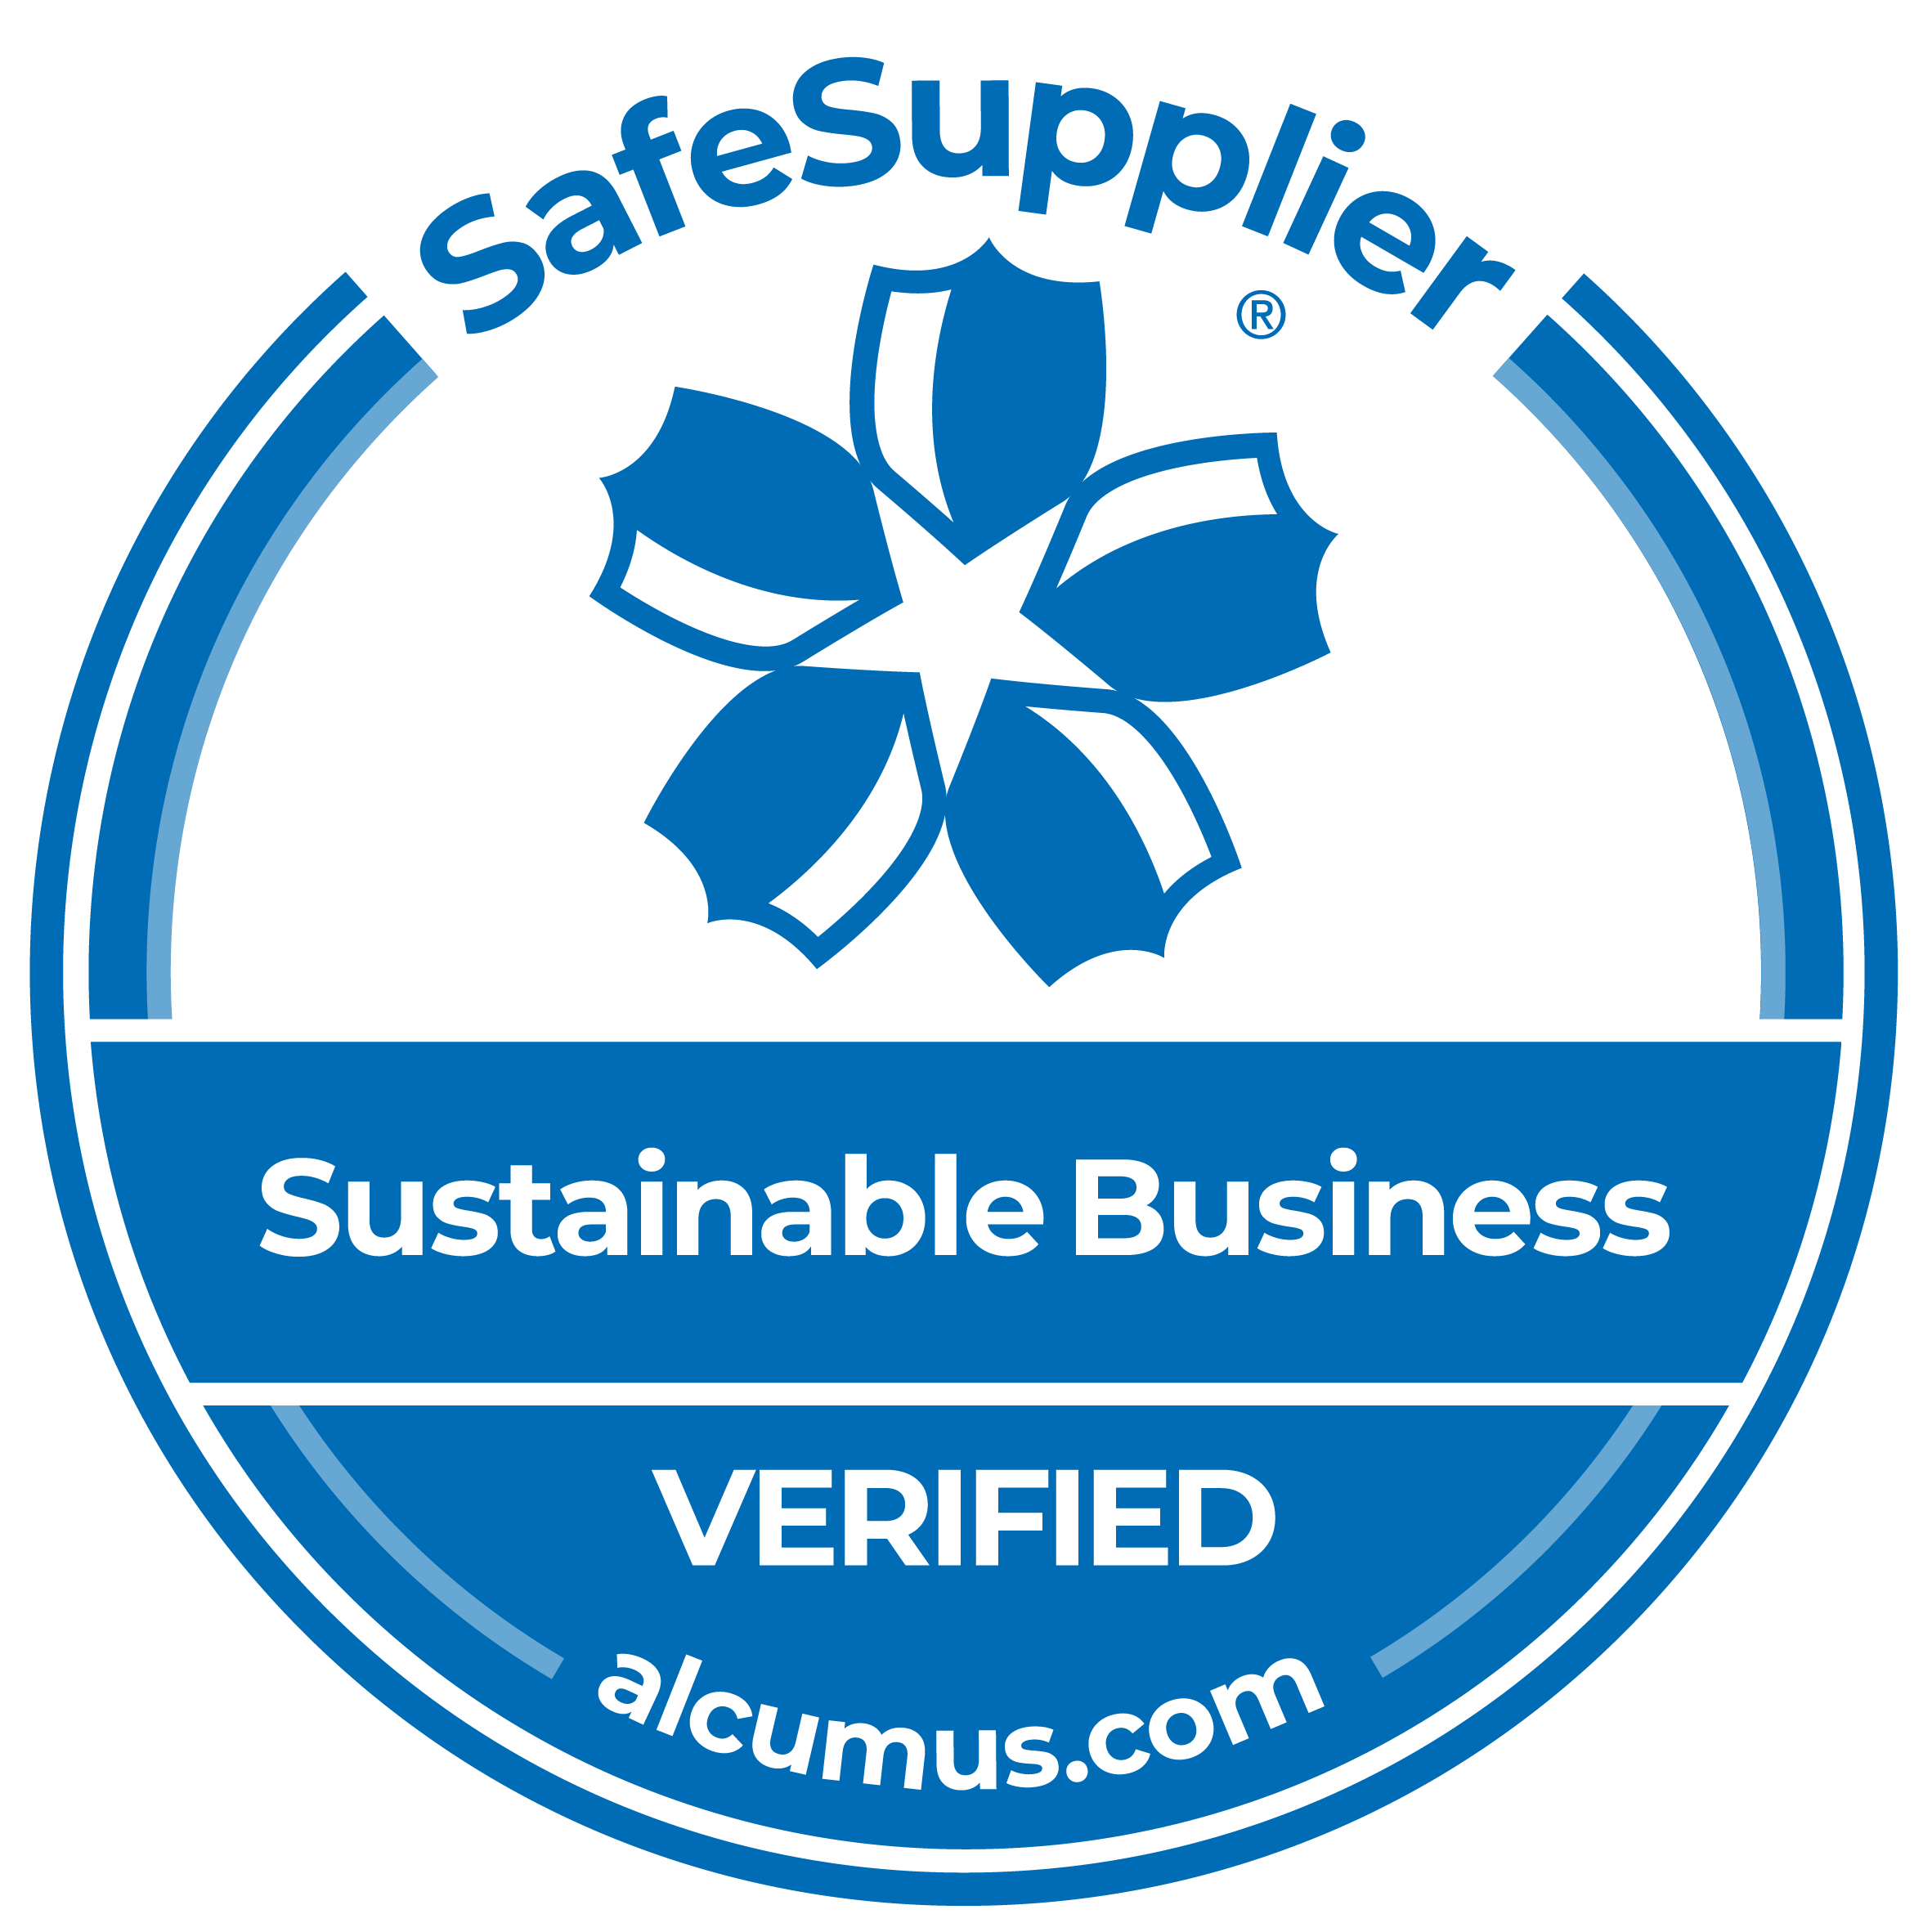 The SafeSupplier Cerification badge to show Synthetix has been awarded this body